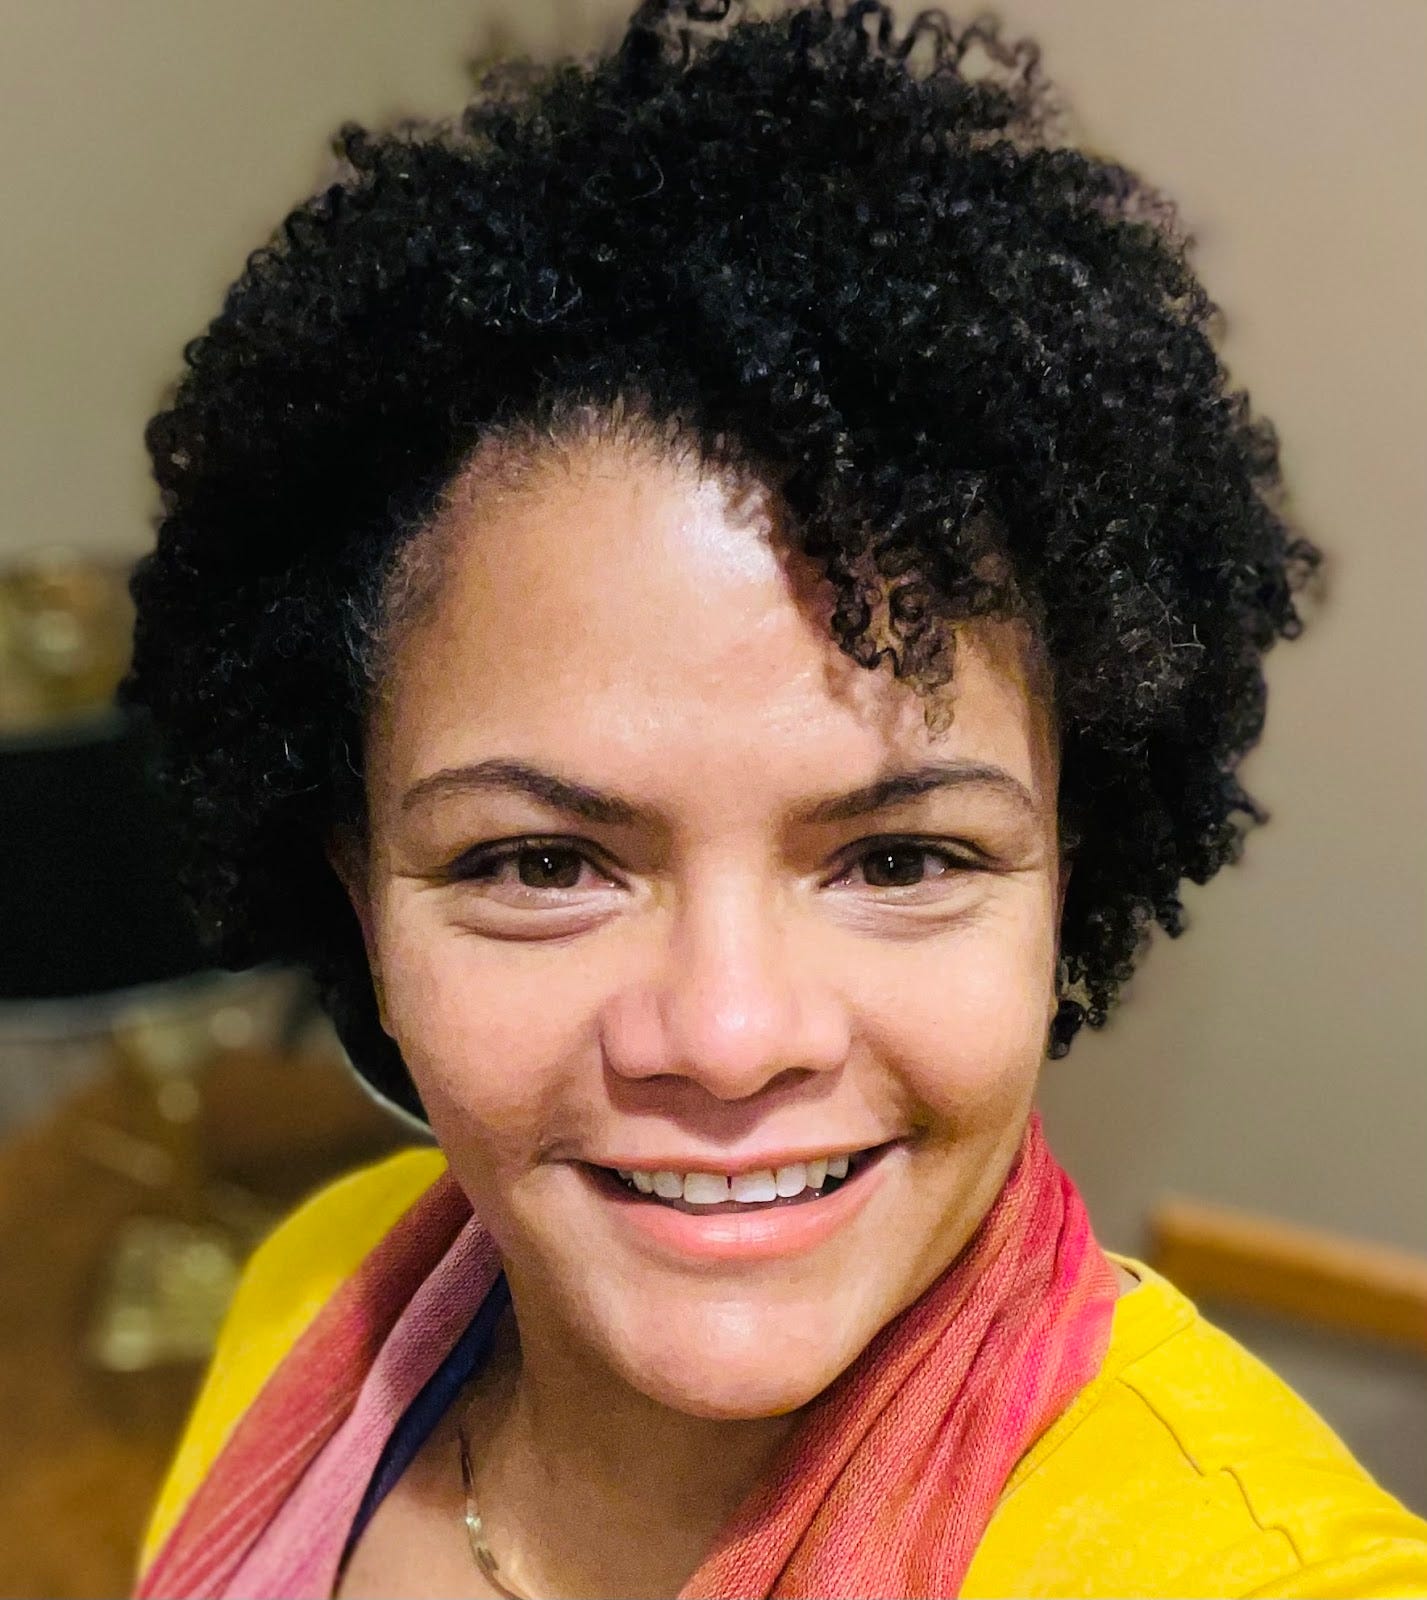 A photo of a smiling Black woman with mid-length curly hair. She is wearing a yellow shirt and orange scarf.